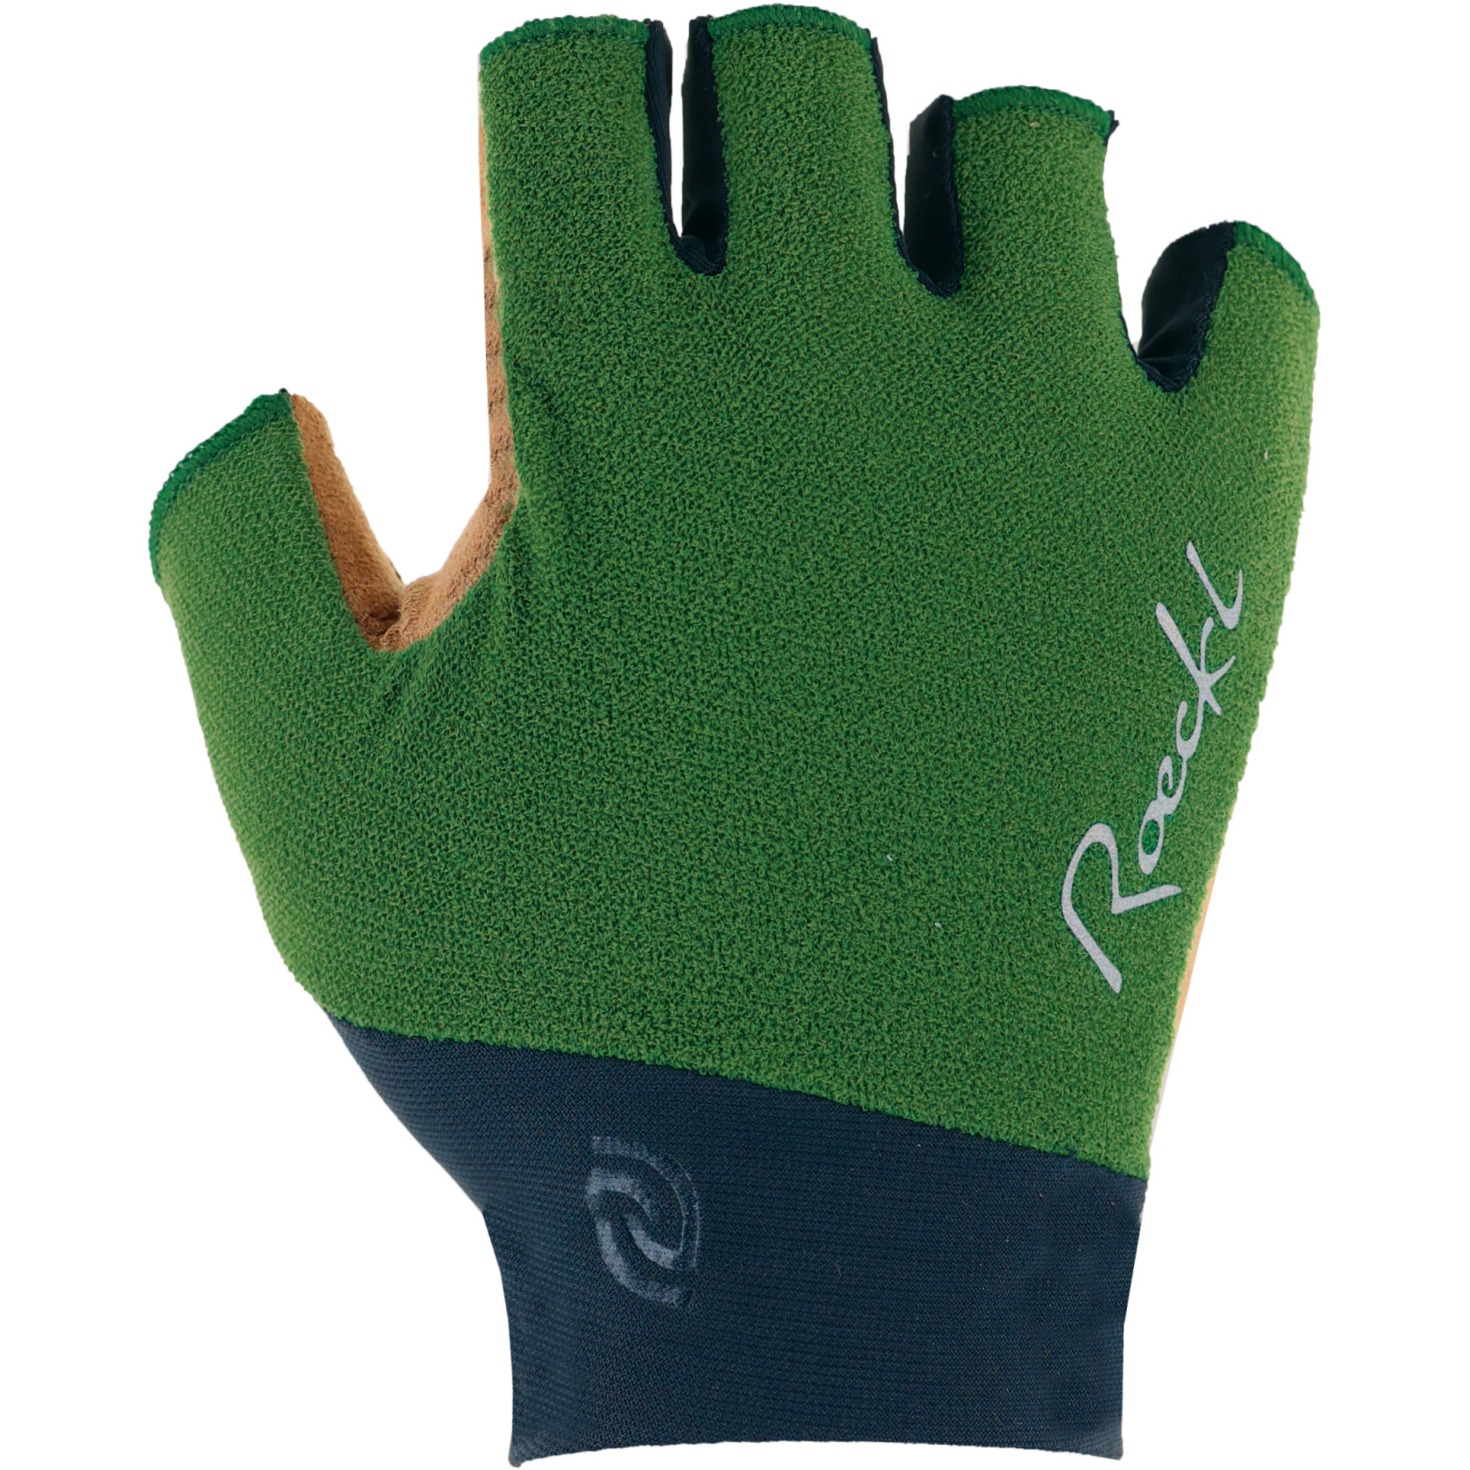 Picture of Roeckl Sports Deleni Cycling Gloves Women - palm leaf 6820